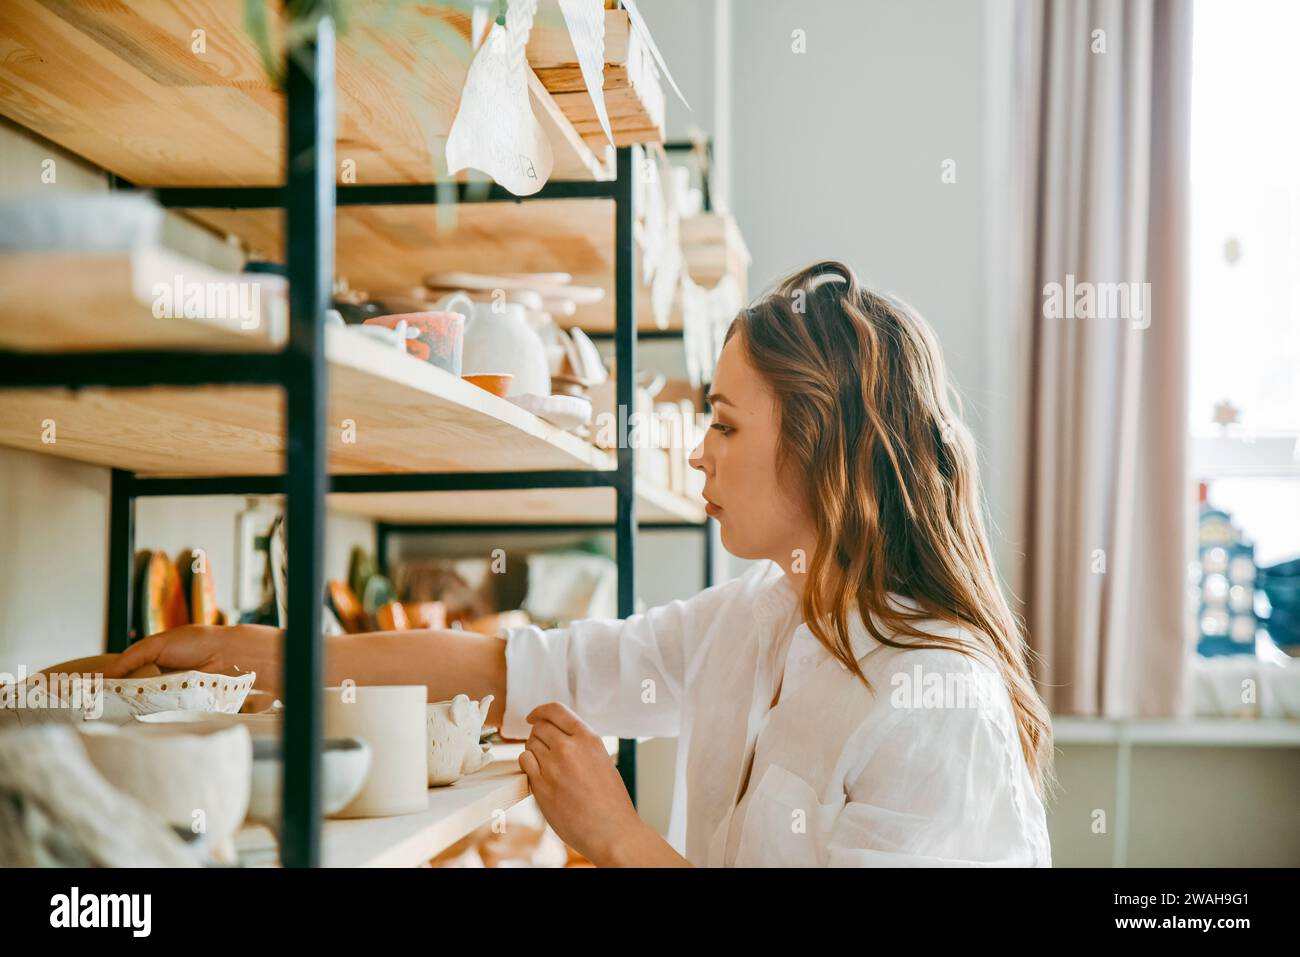 A woman head of pottery workshop near shelves with products Stock Photo